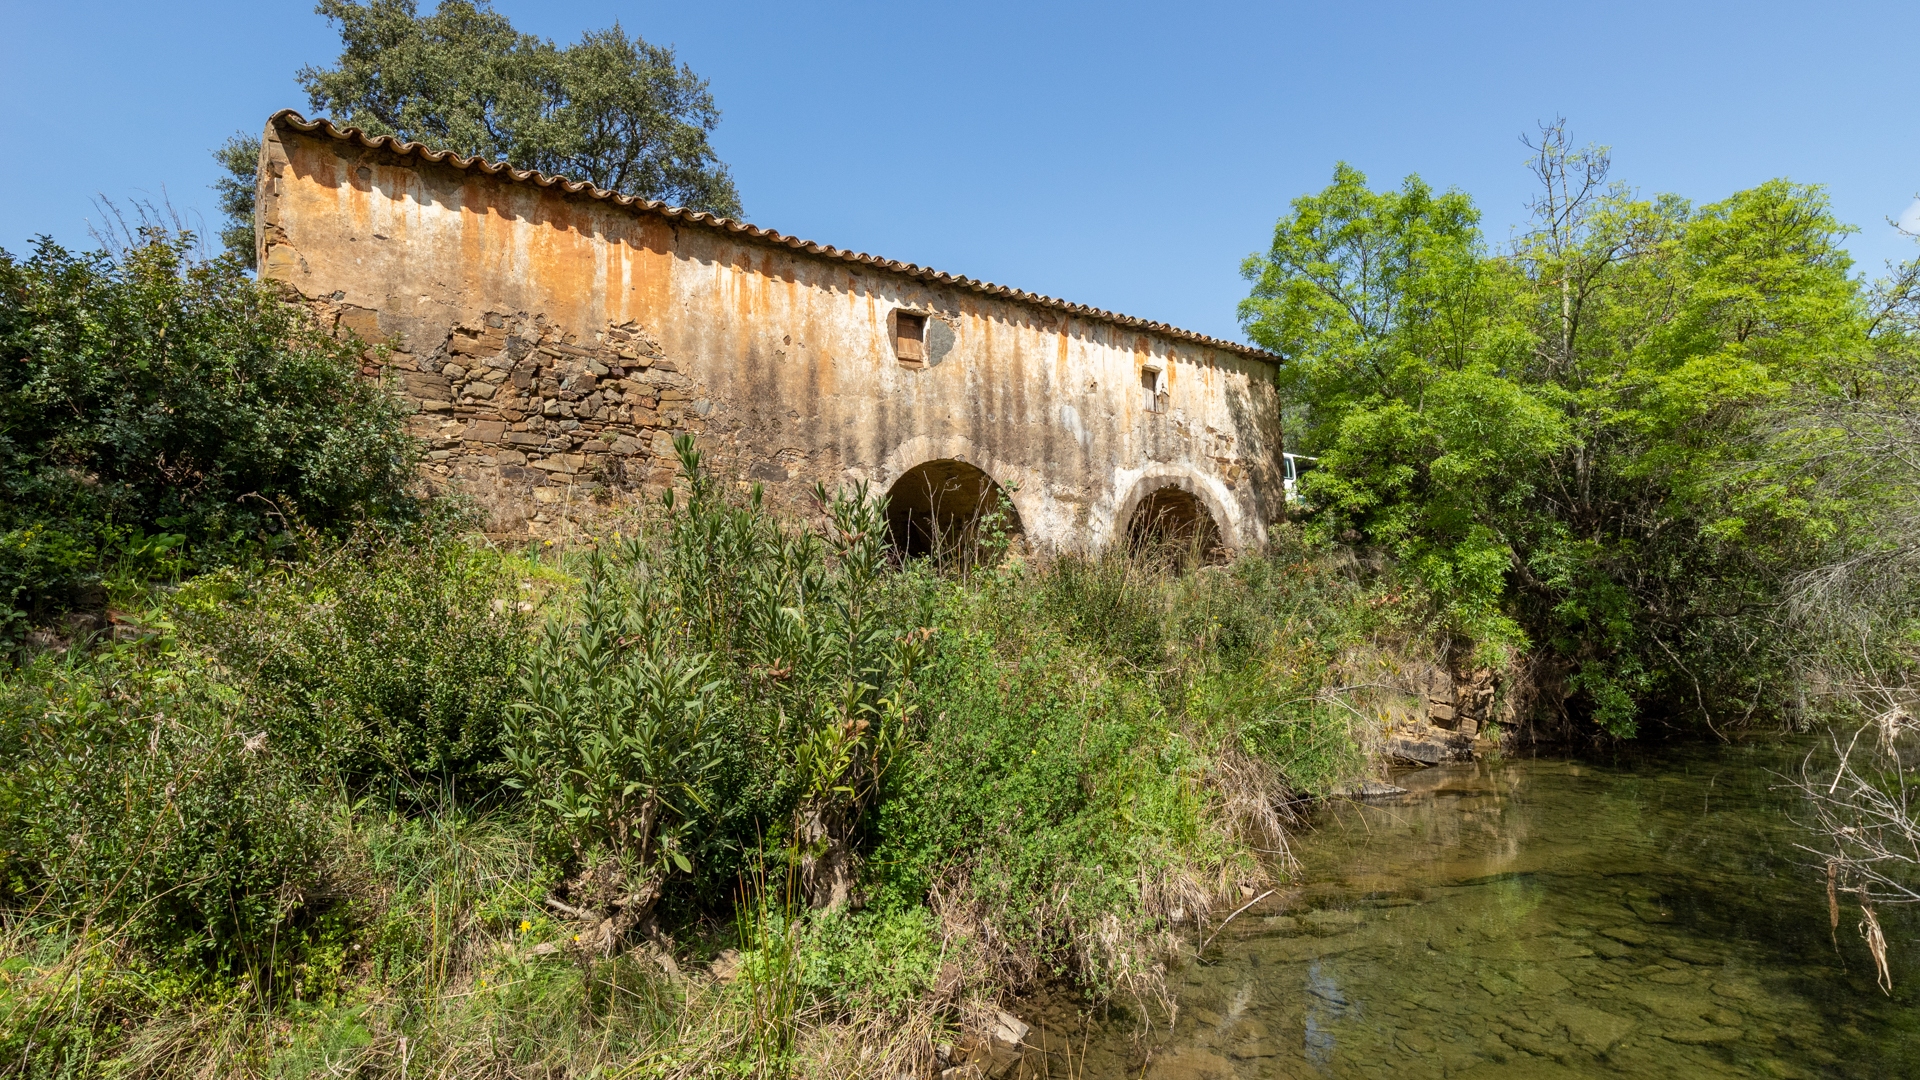 Watermill for restoration in idyllic location with river front, near Santa Catarina, East Algarve | TV1904 A rare opportunity to purchase a historic watermill with 1.4 ha. land and 350 m of riverfront in beautiful, peaceful countryside, near Santa Catarina and Tavira. Once restored, this property will be an idyllic home or holiday property.